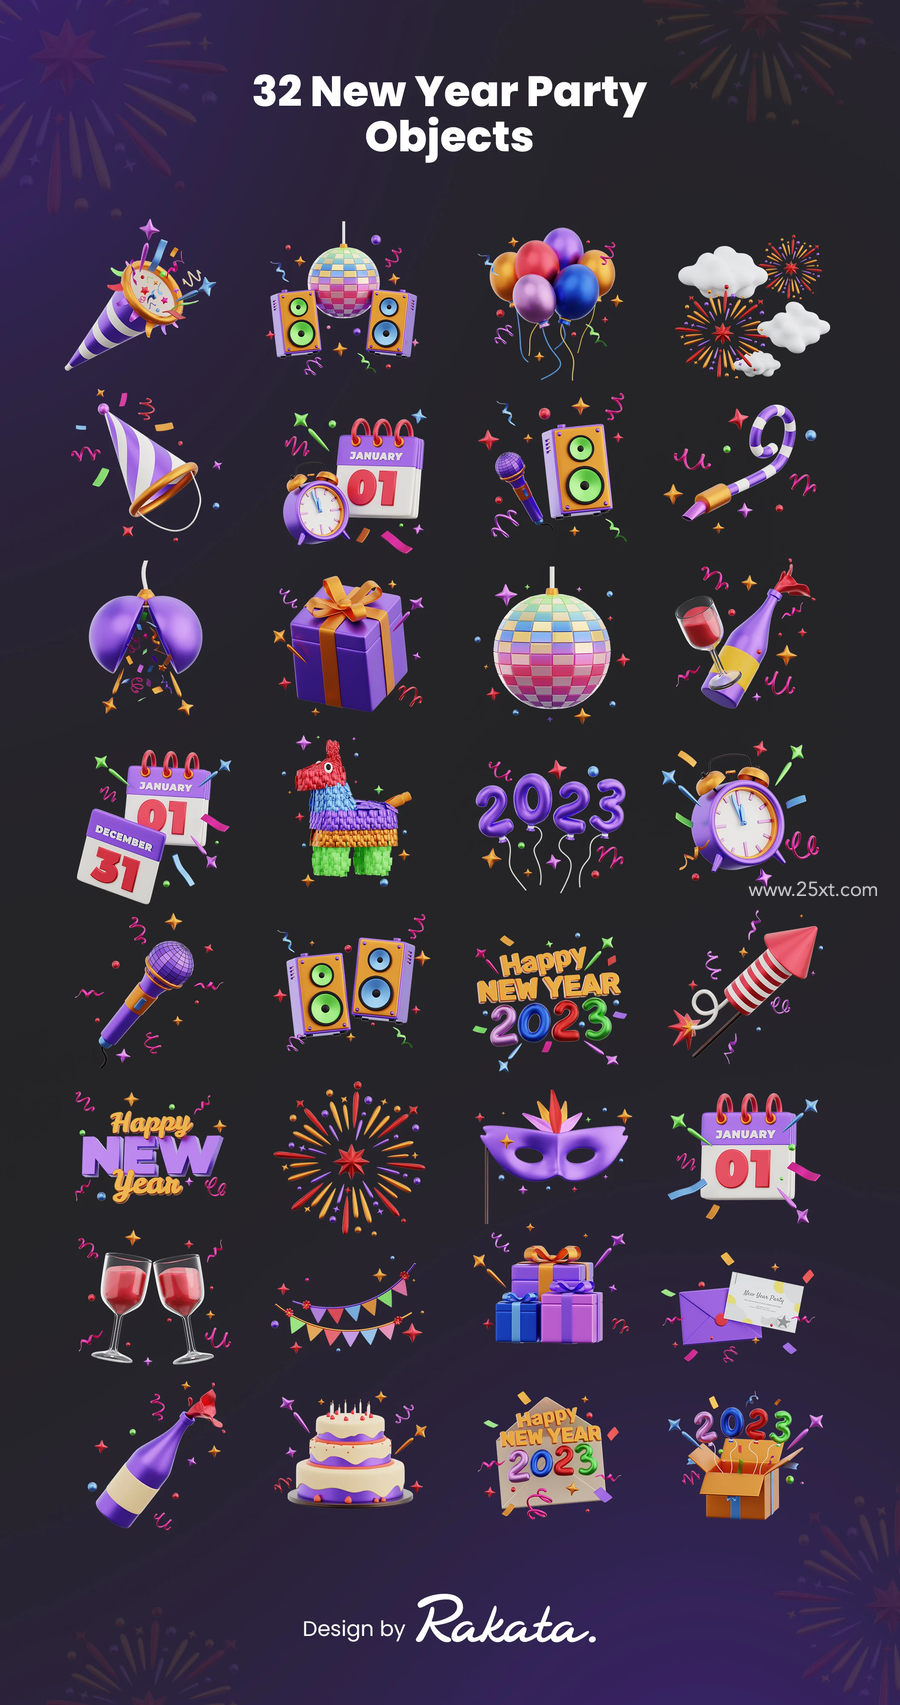 25xt-172691-New Year Party 3D Icons7.jpg